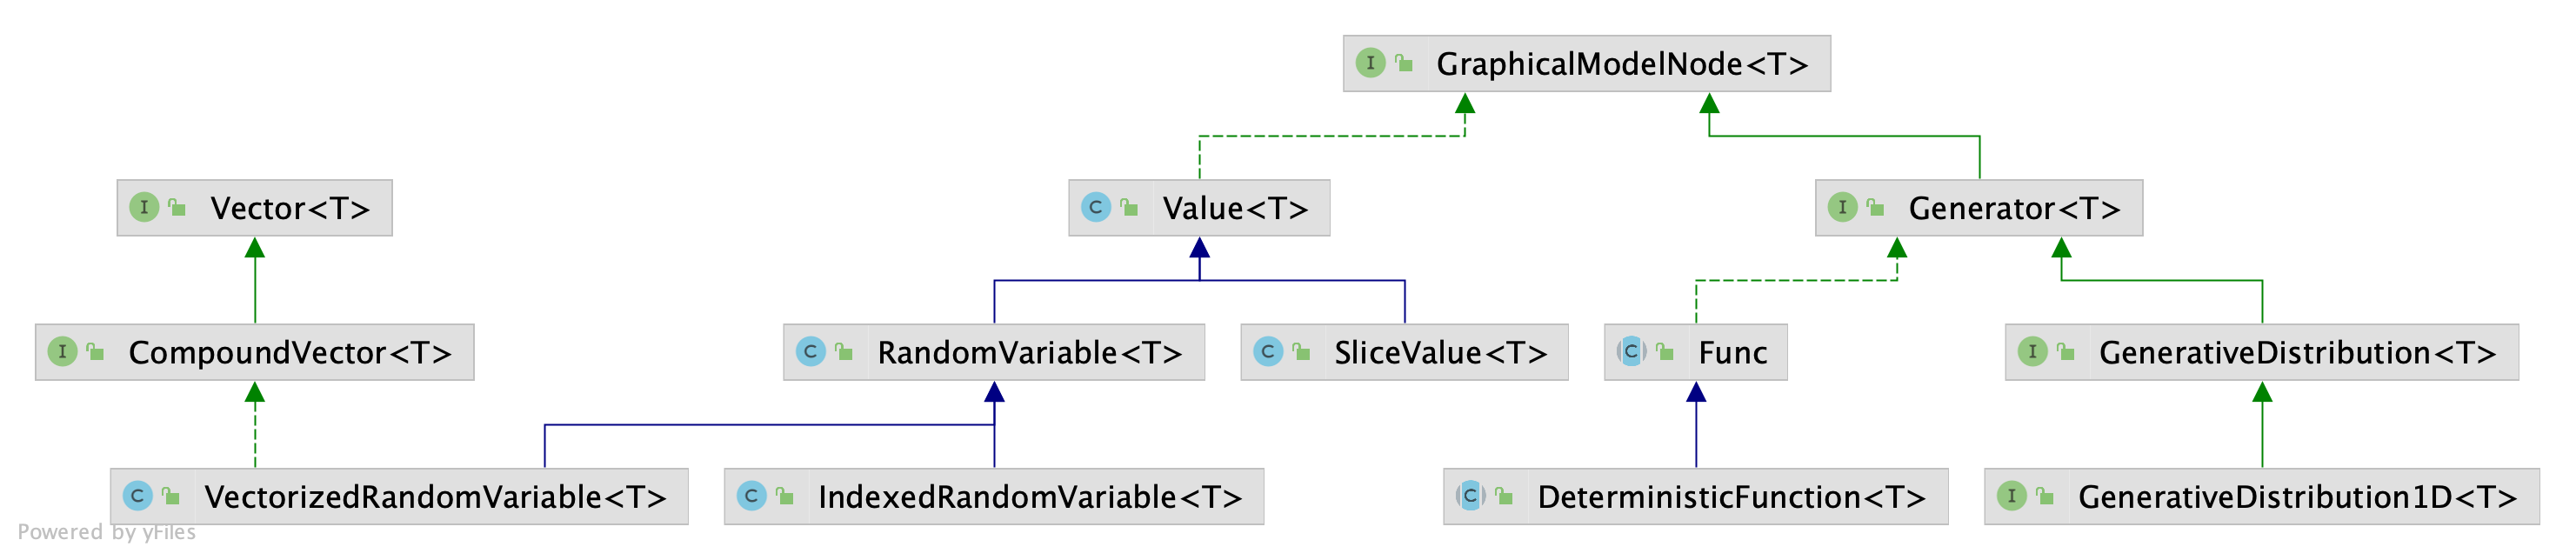 GraphicalModelNode.png